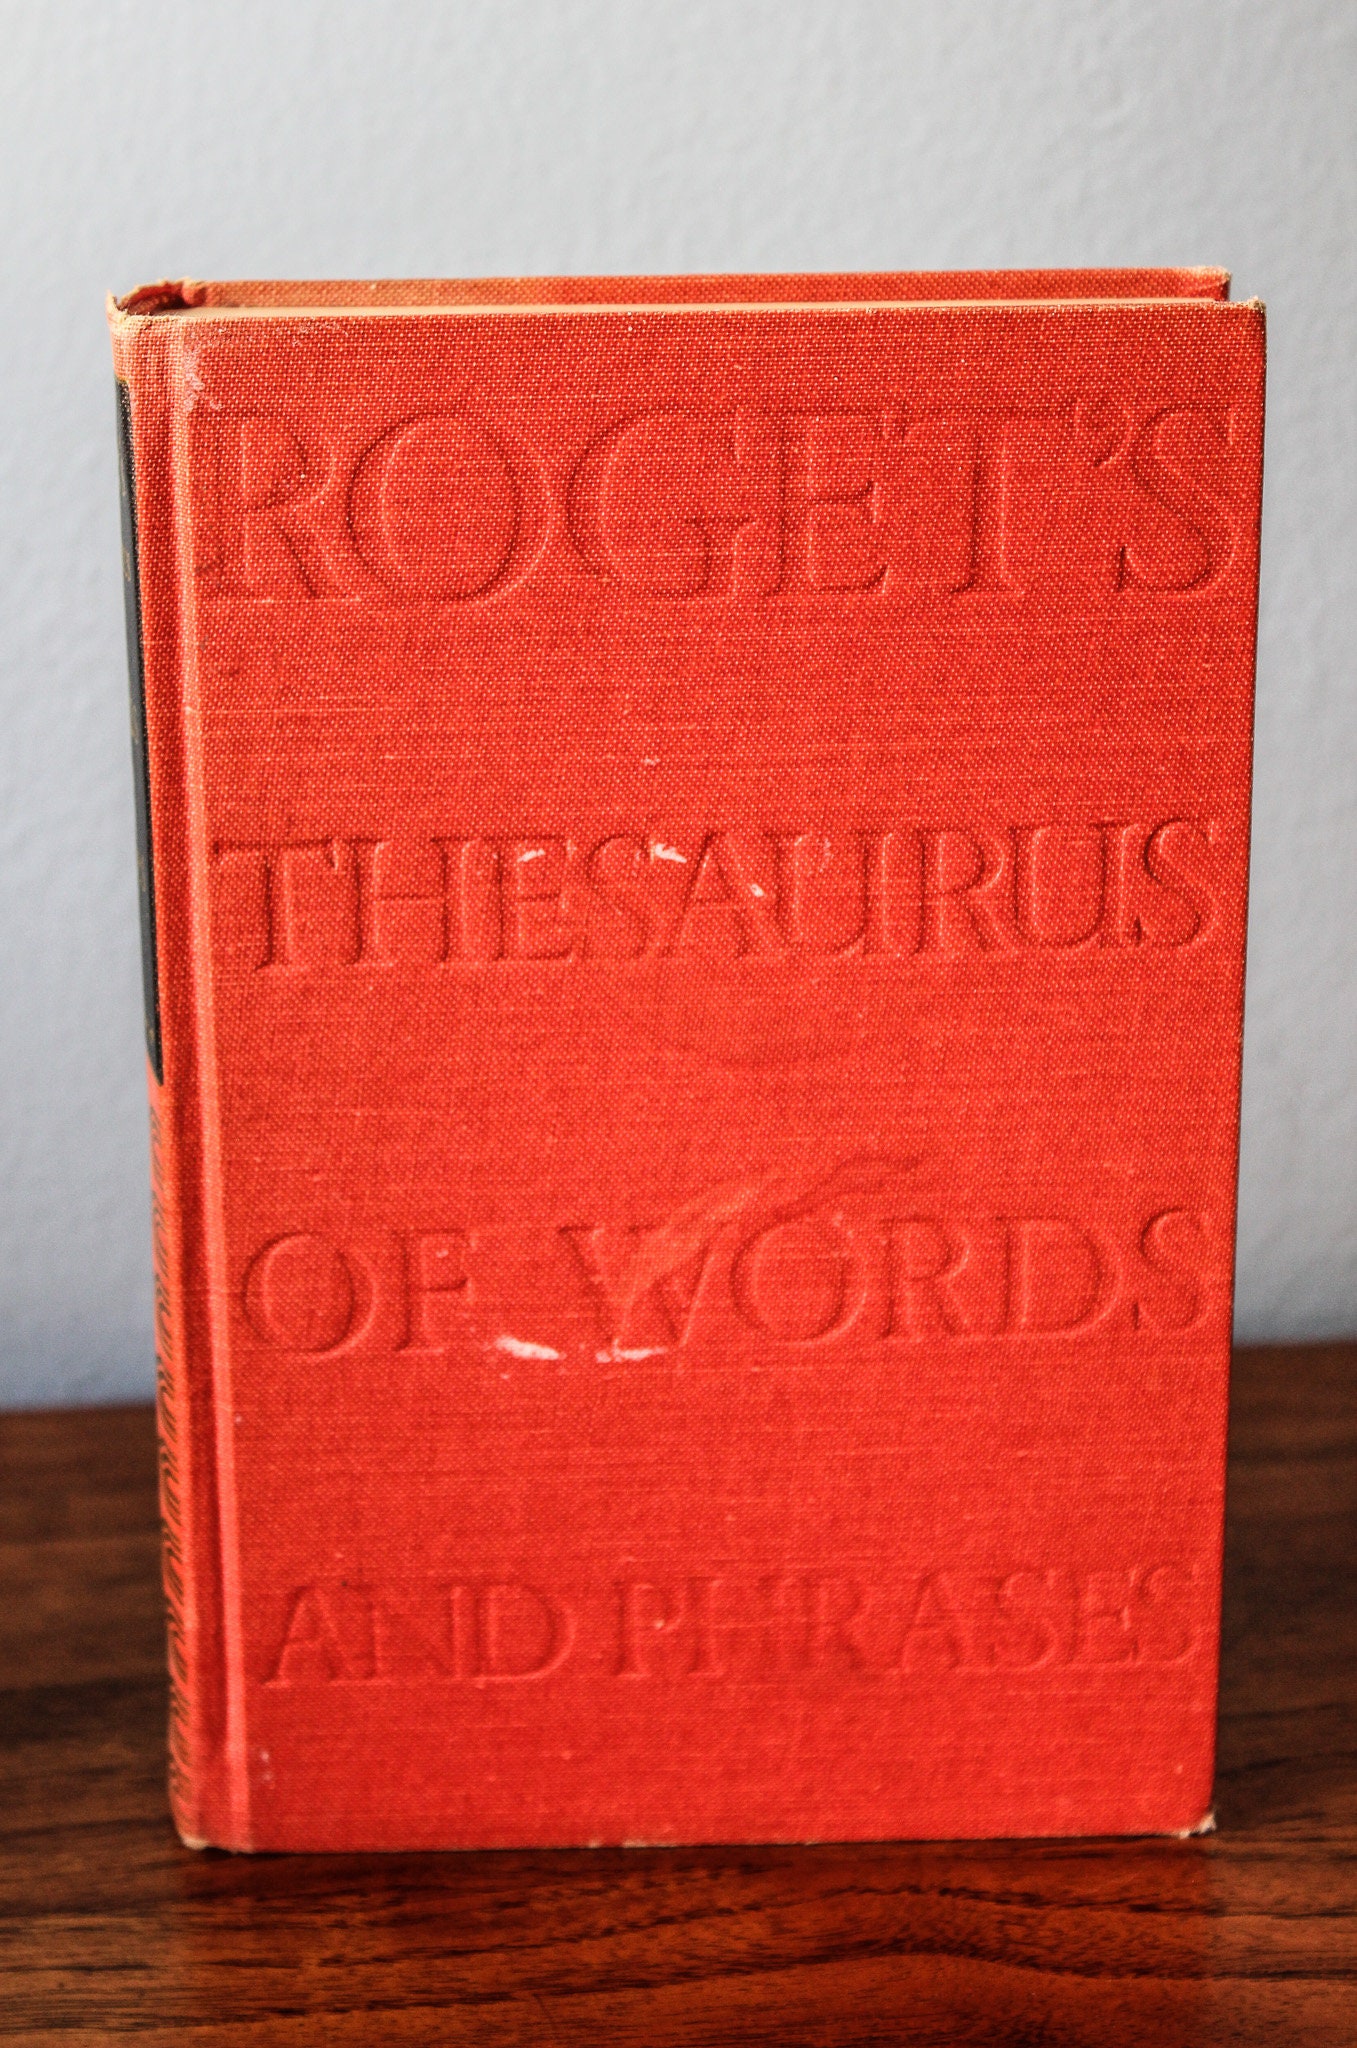 Cover Copy Rogert's Thesaurus Words and - Etsy